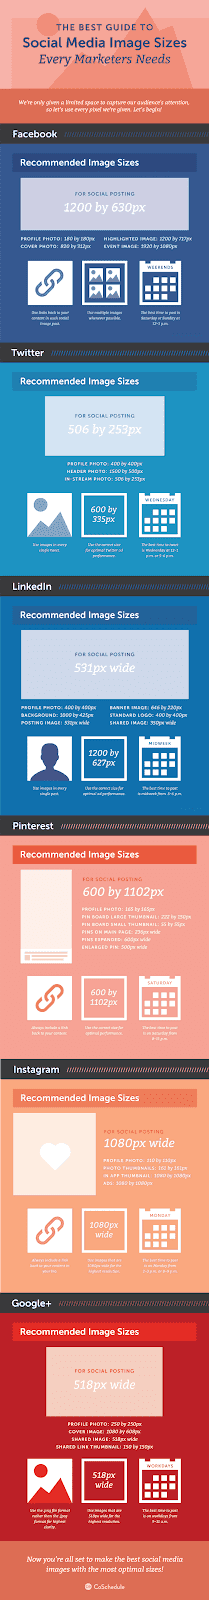 CoSchedule graphic on the best image sizes for each social media company